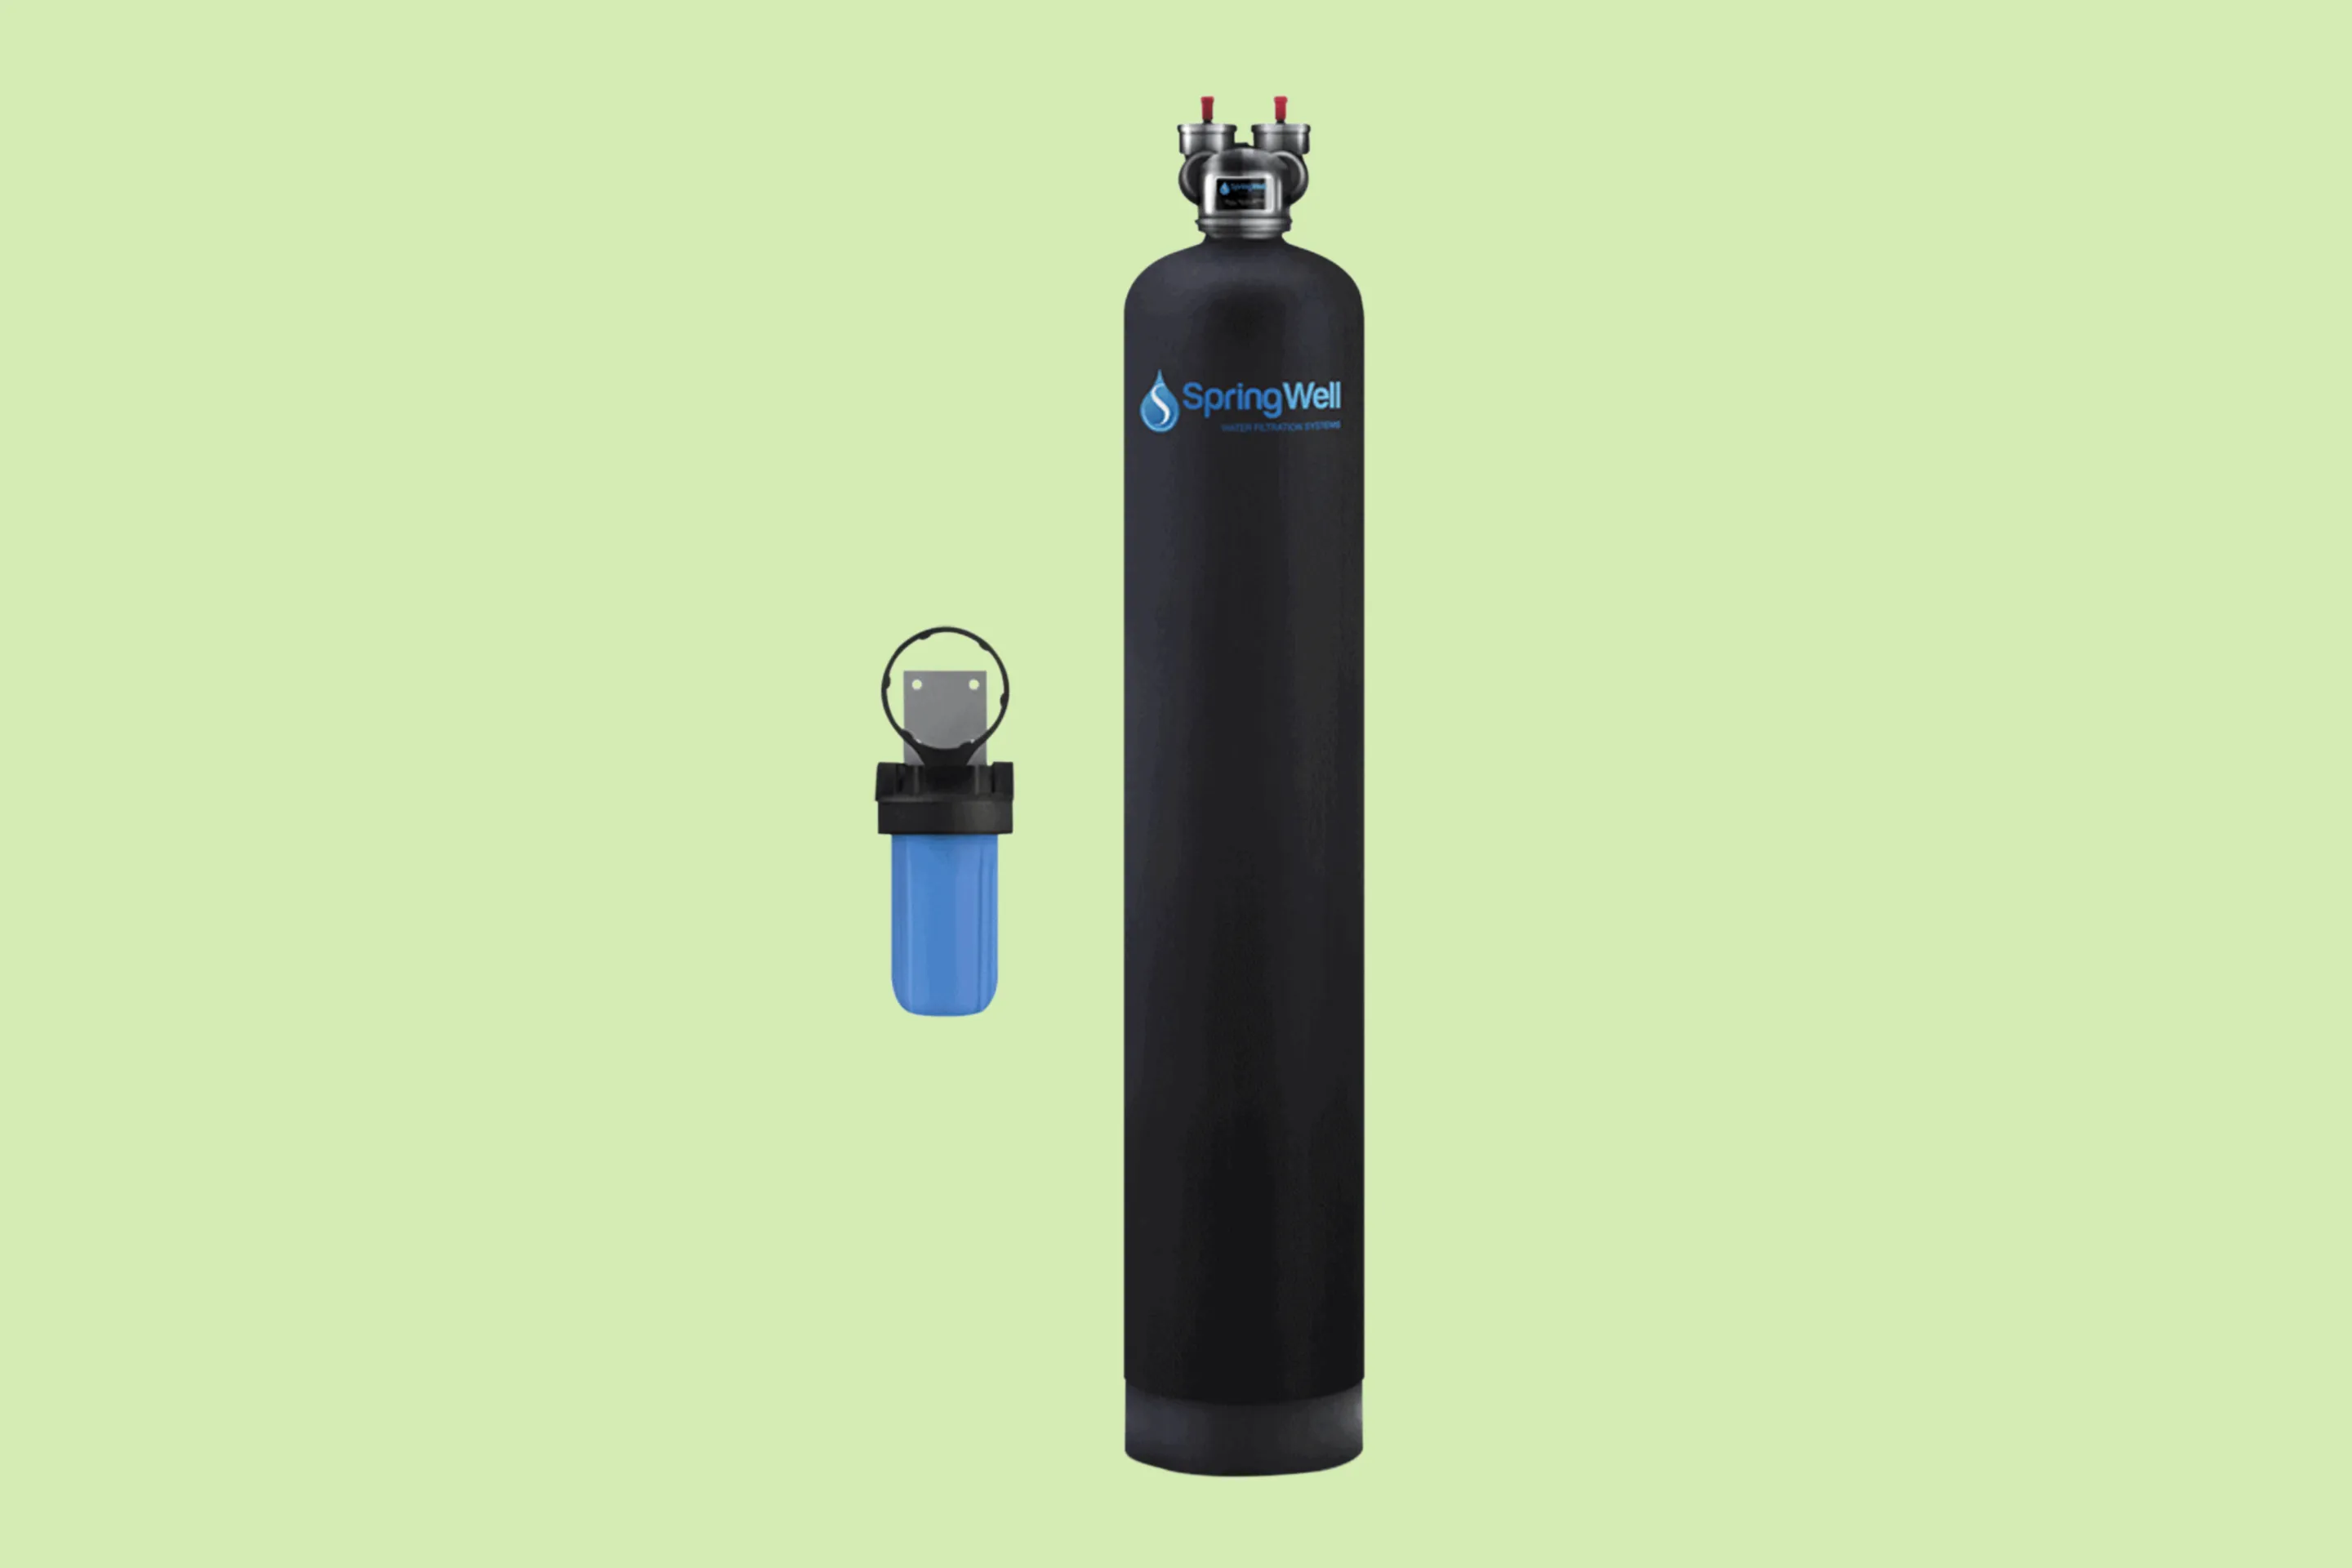 H&G Lifestyles Whole House Water Filtration System Portable Water